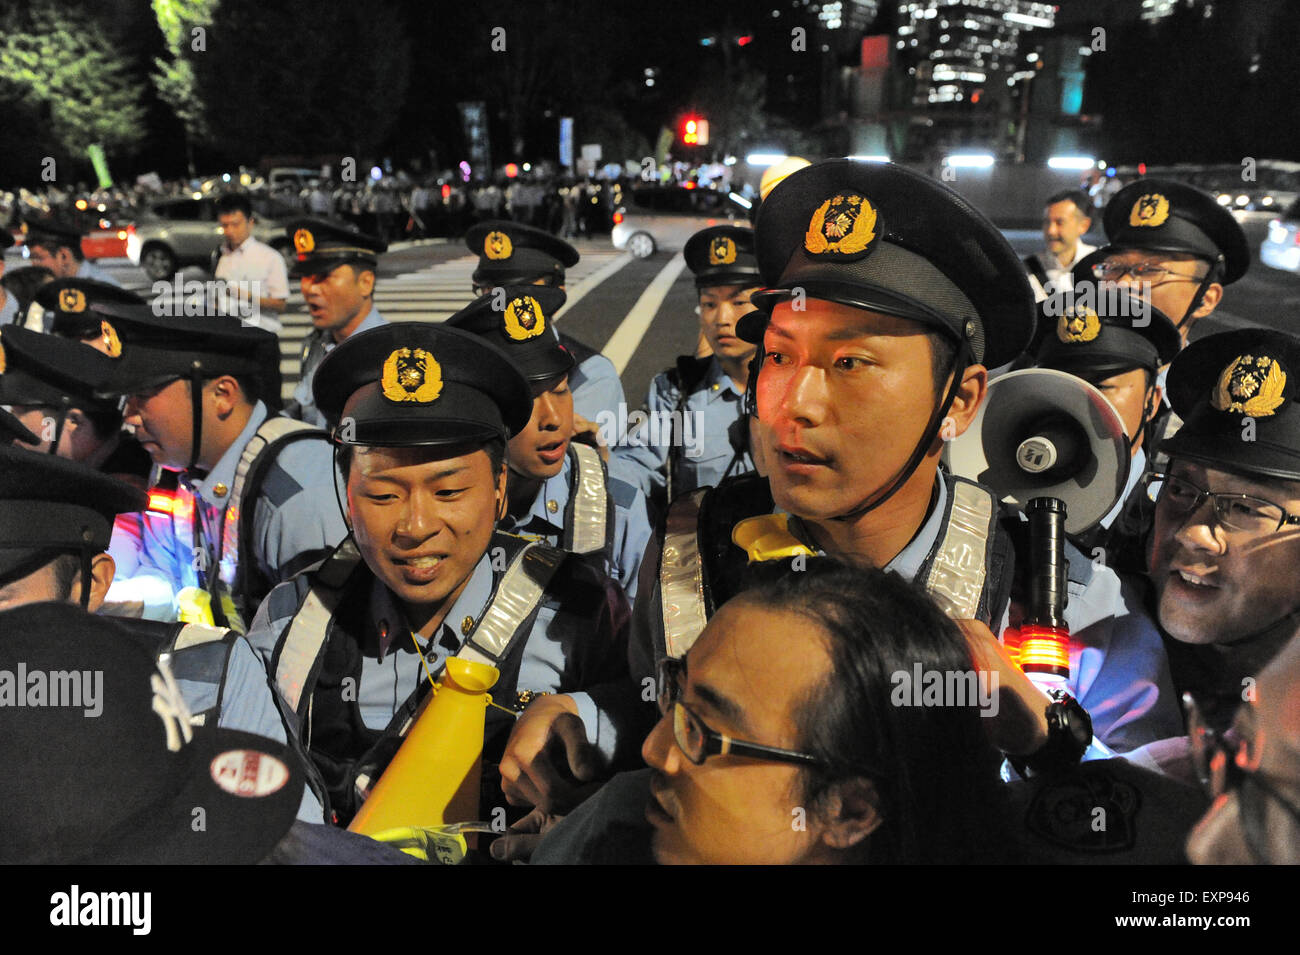 A scene at a protest against Japanese Prime Minister Abe's security policies at Japan's parliament in Tokyo on July 15, 2015. According to the organizers, Students Emergency Action for Liberal Democracy (SEALDs), some 100,000 people participated which police had much trouble to control. Earlier in the day, a special committee of the Lower House had cleared a bill for voting. Stock Photo